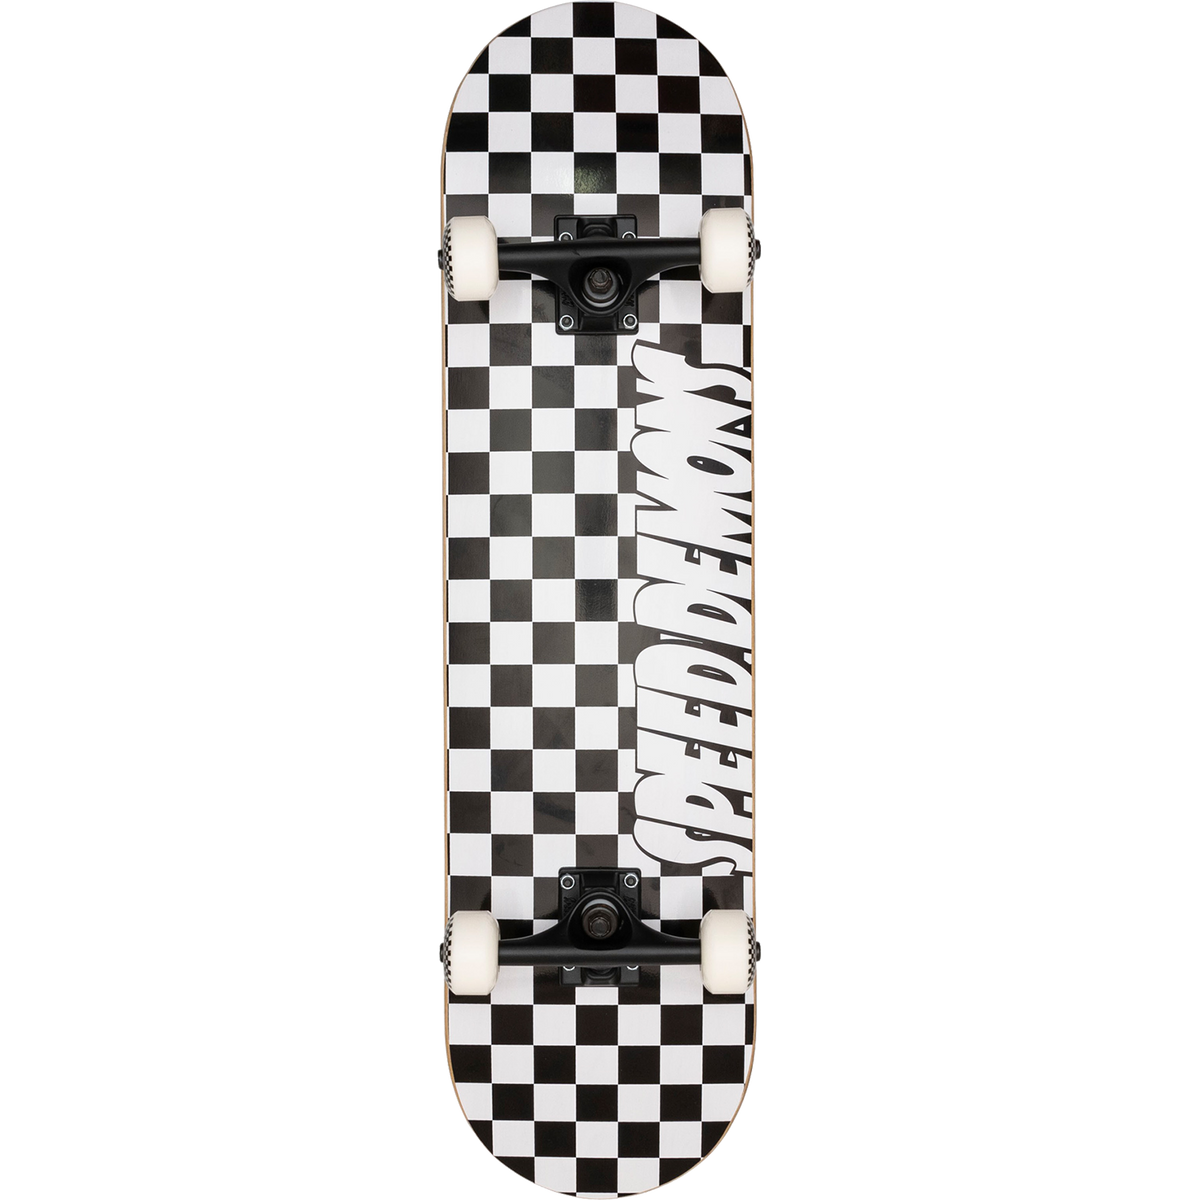 SPEED DEMONS // CHECKERS COMPLETE-8.0 BLK/WHT